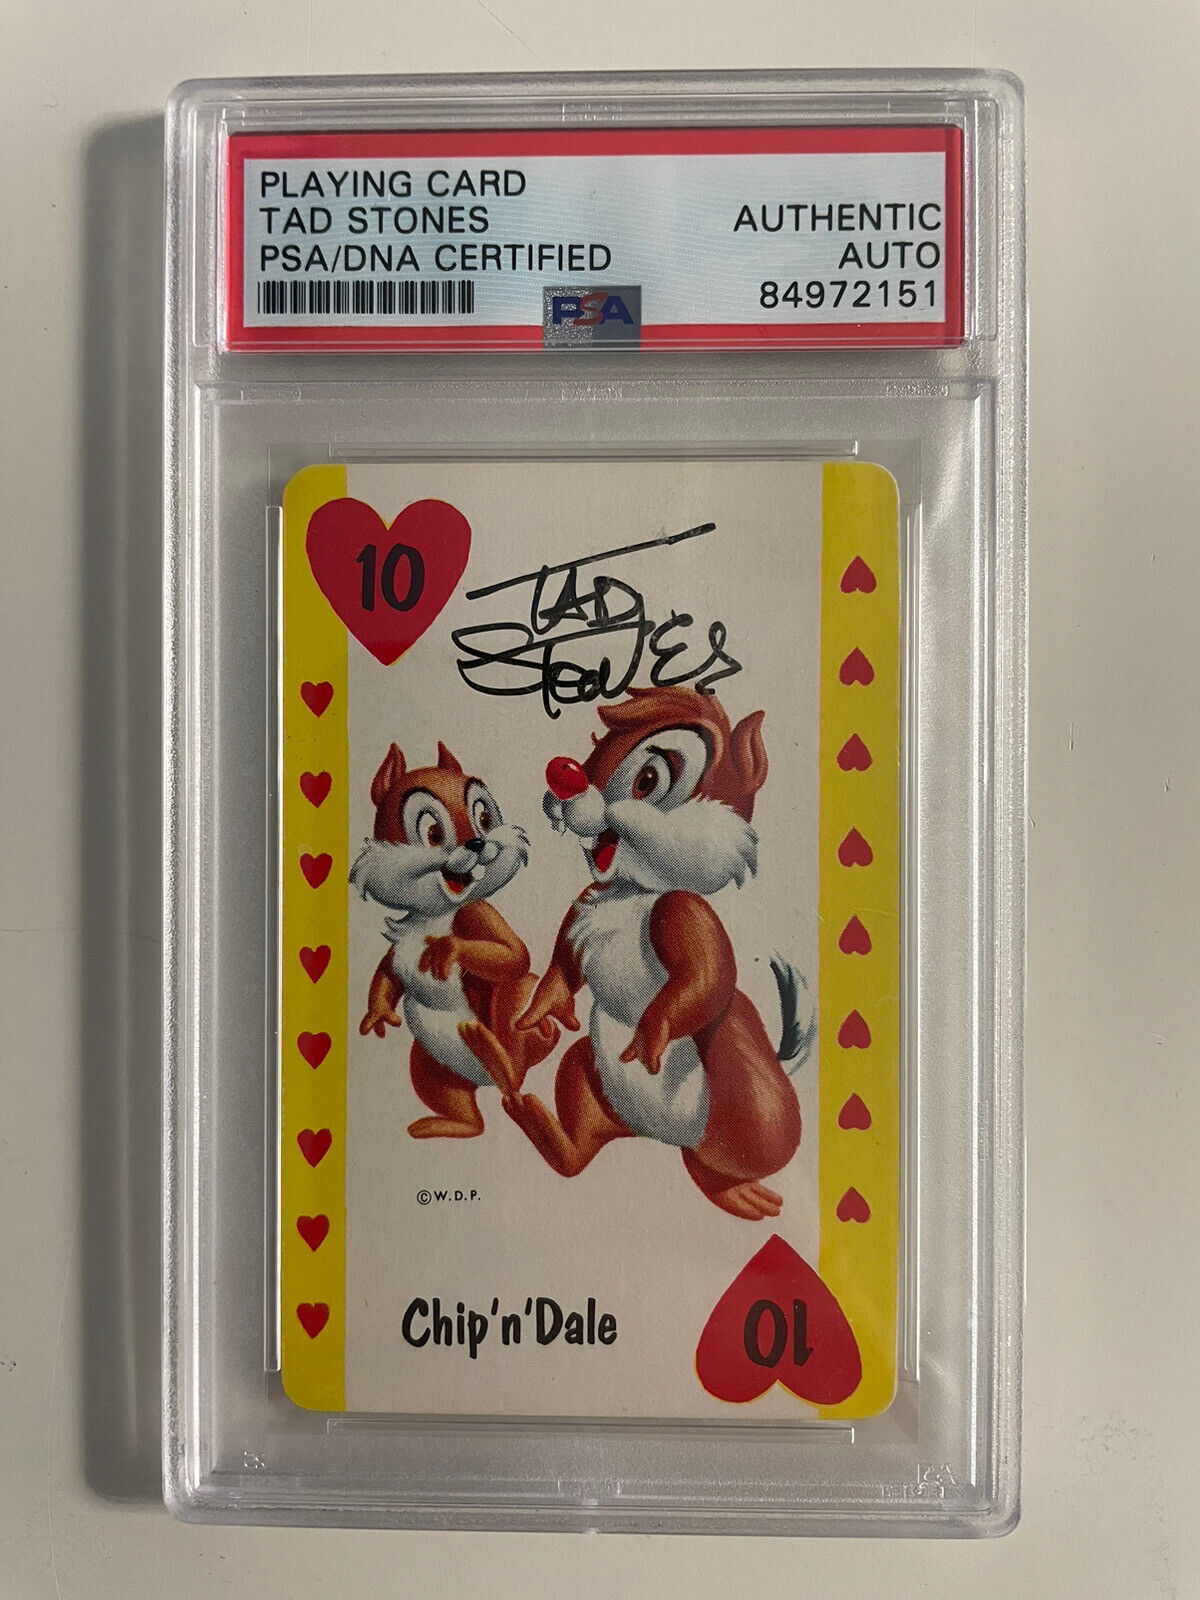 TAD STONES autograph DISNEY ARTIST Chip ‘n Dale VINTAGE playing card signed PSA